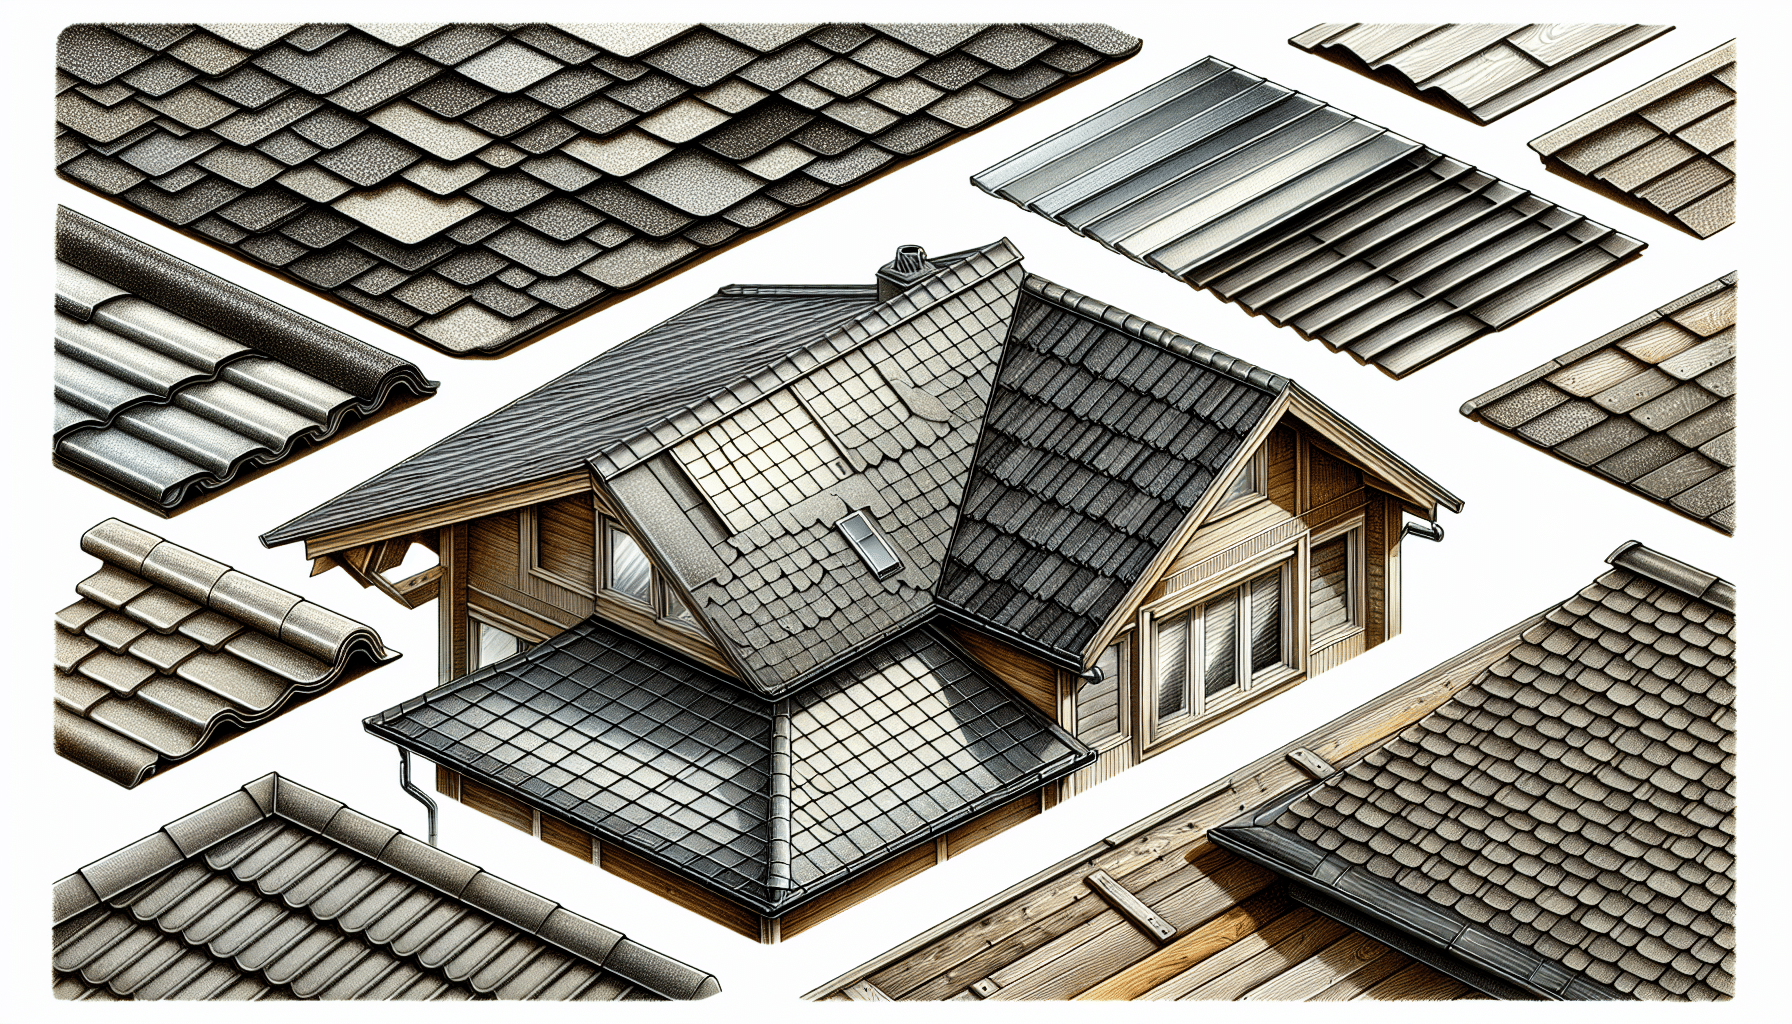 Variety of roofing materials